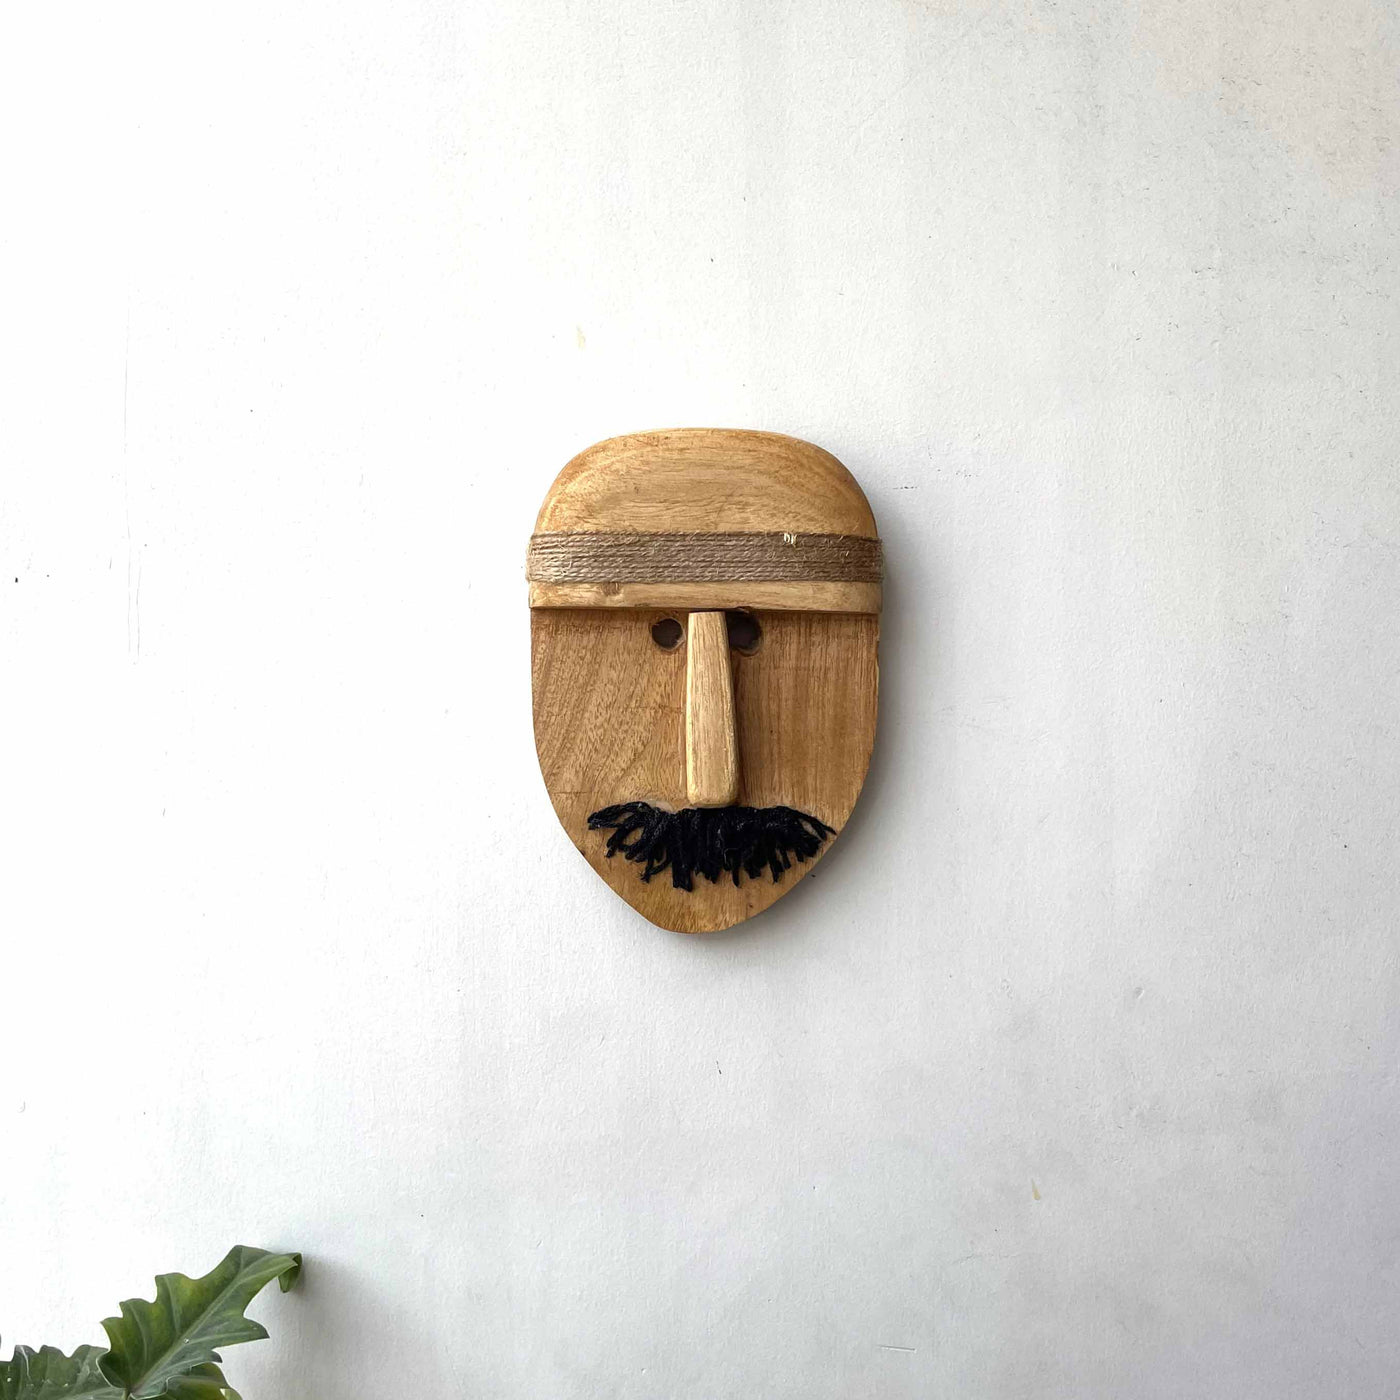 Wooden Tribal Man with Mustache Small Mask - Wall Decor - 3